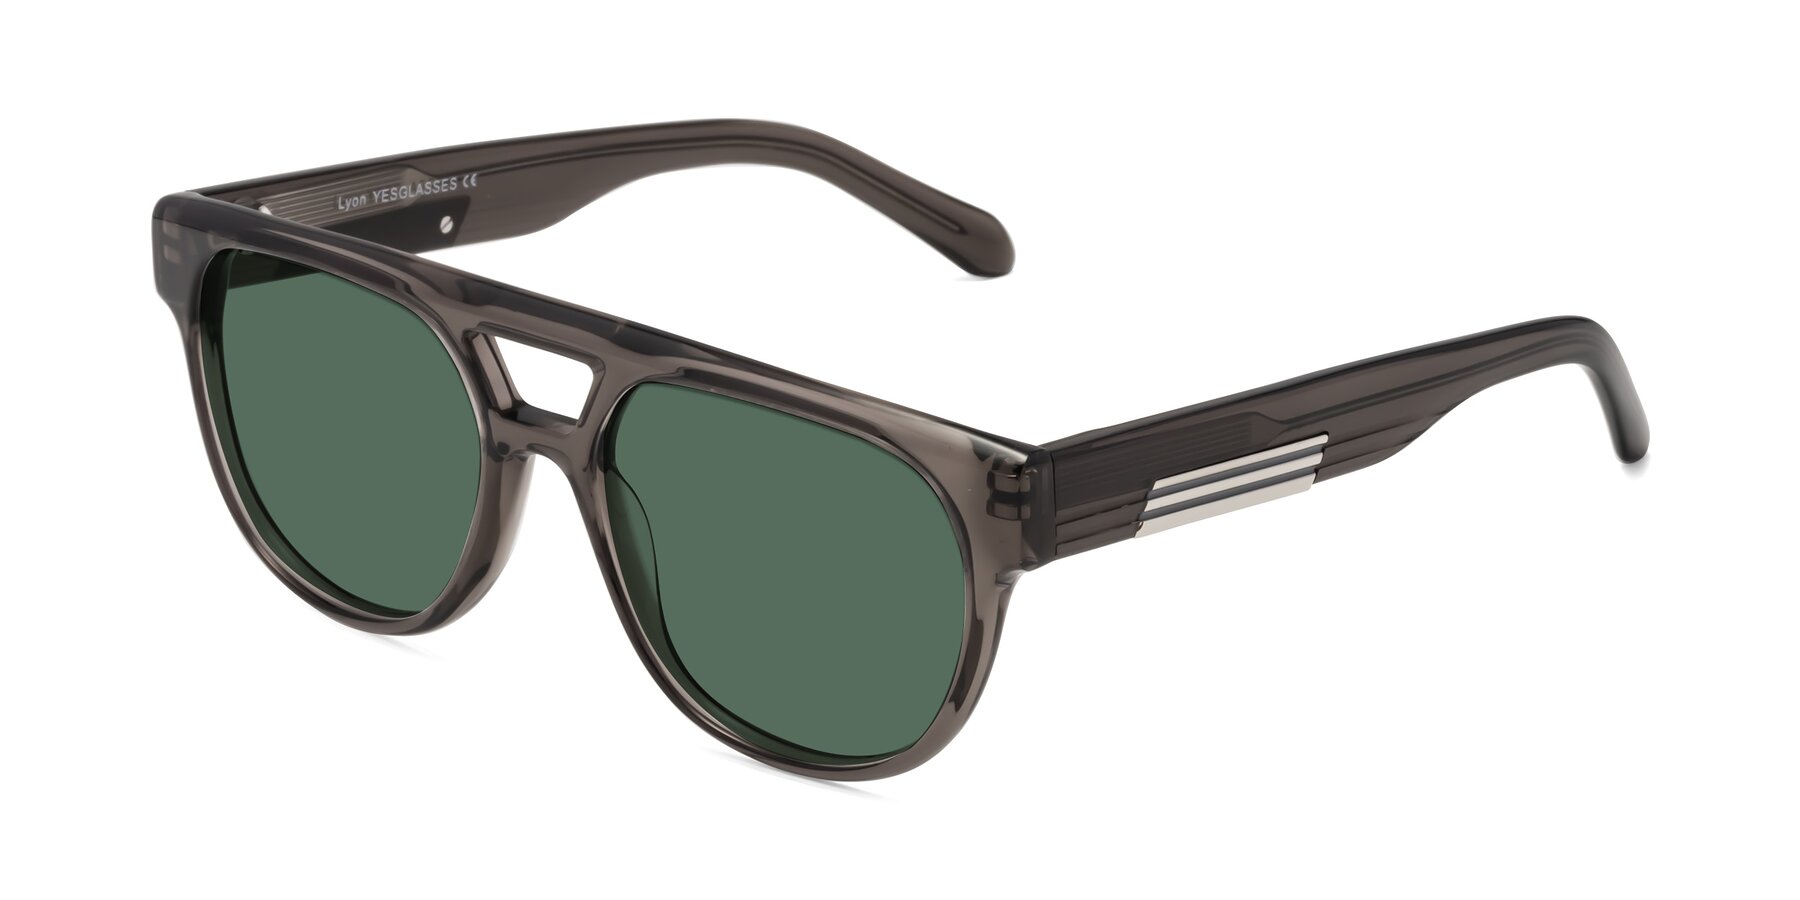 Angle of Lyon in Charcoal Gray with Green Polarized Lenses